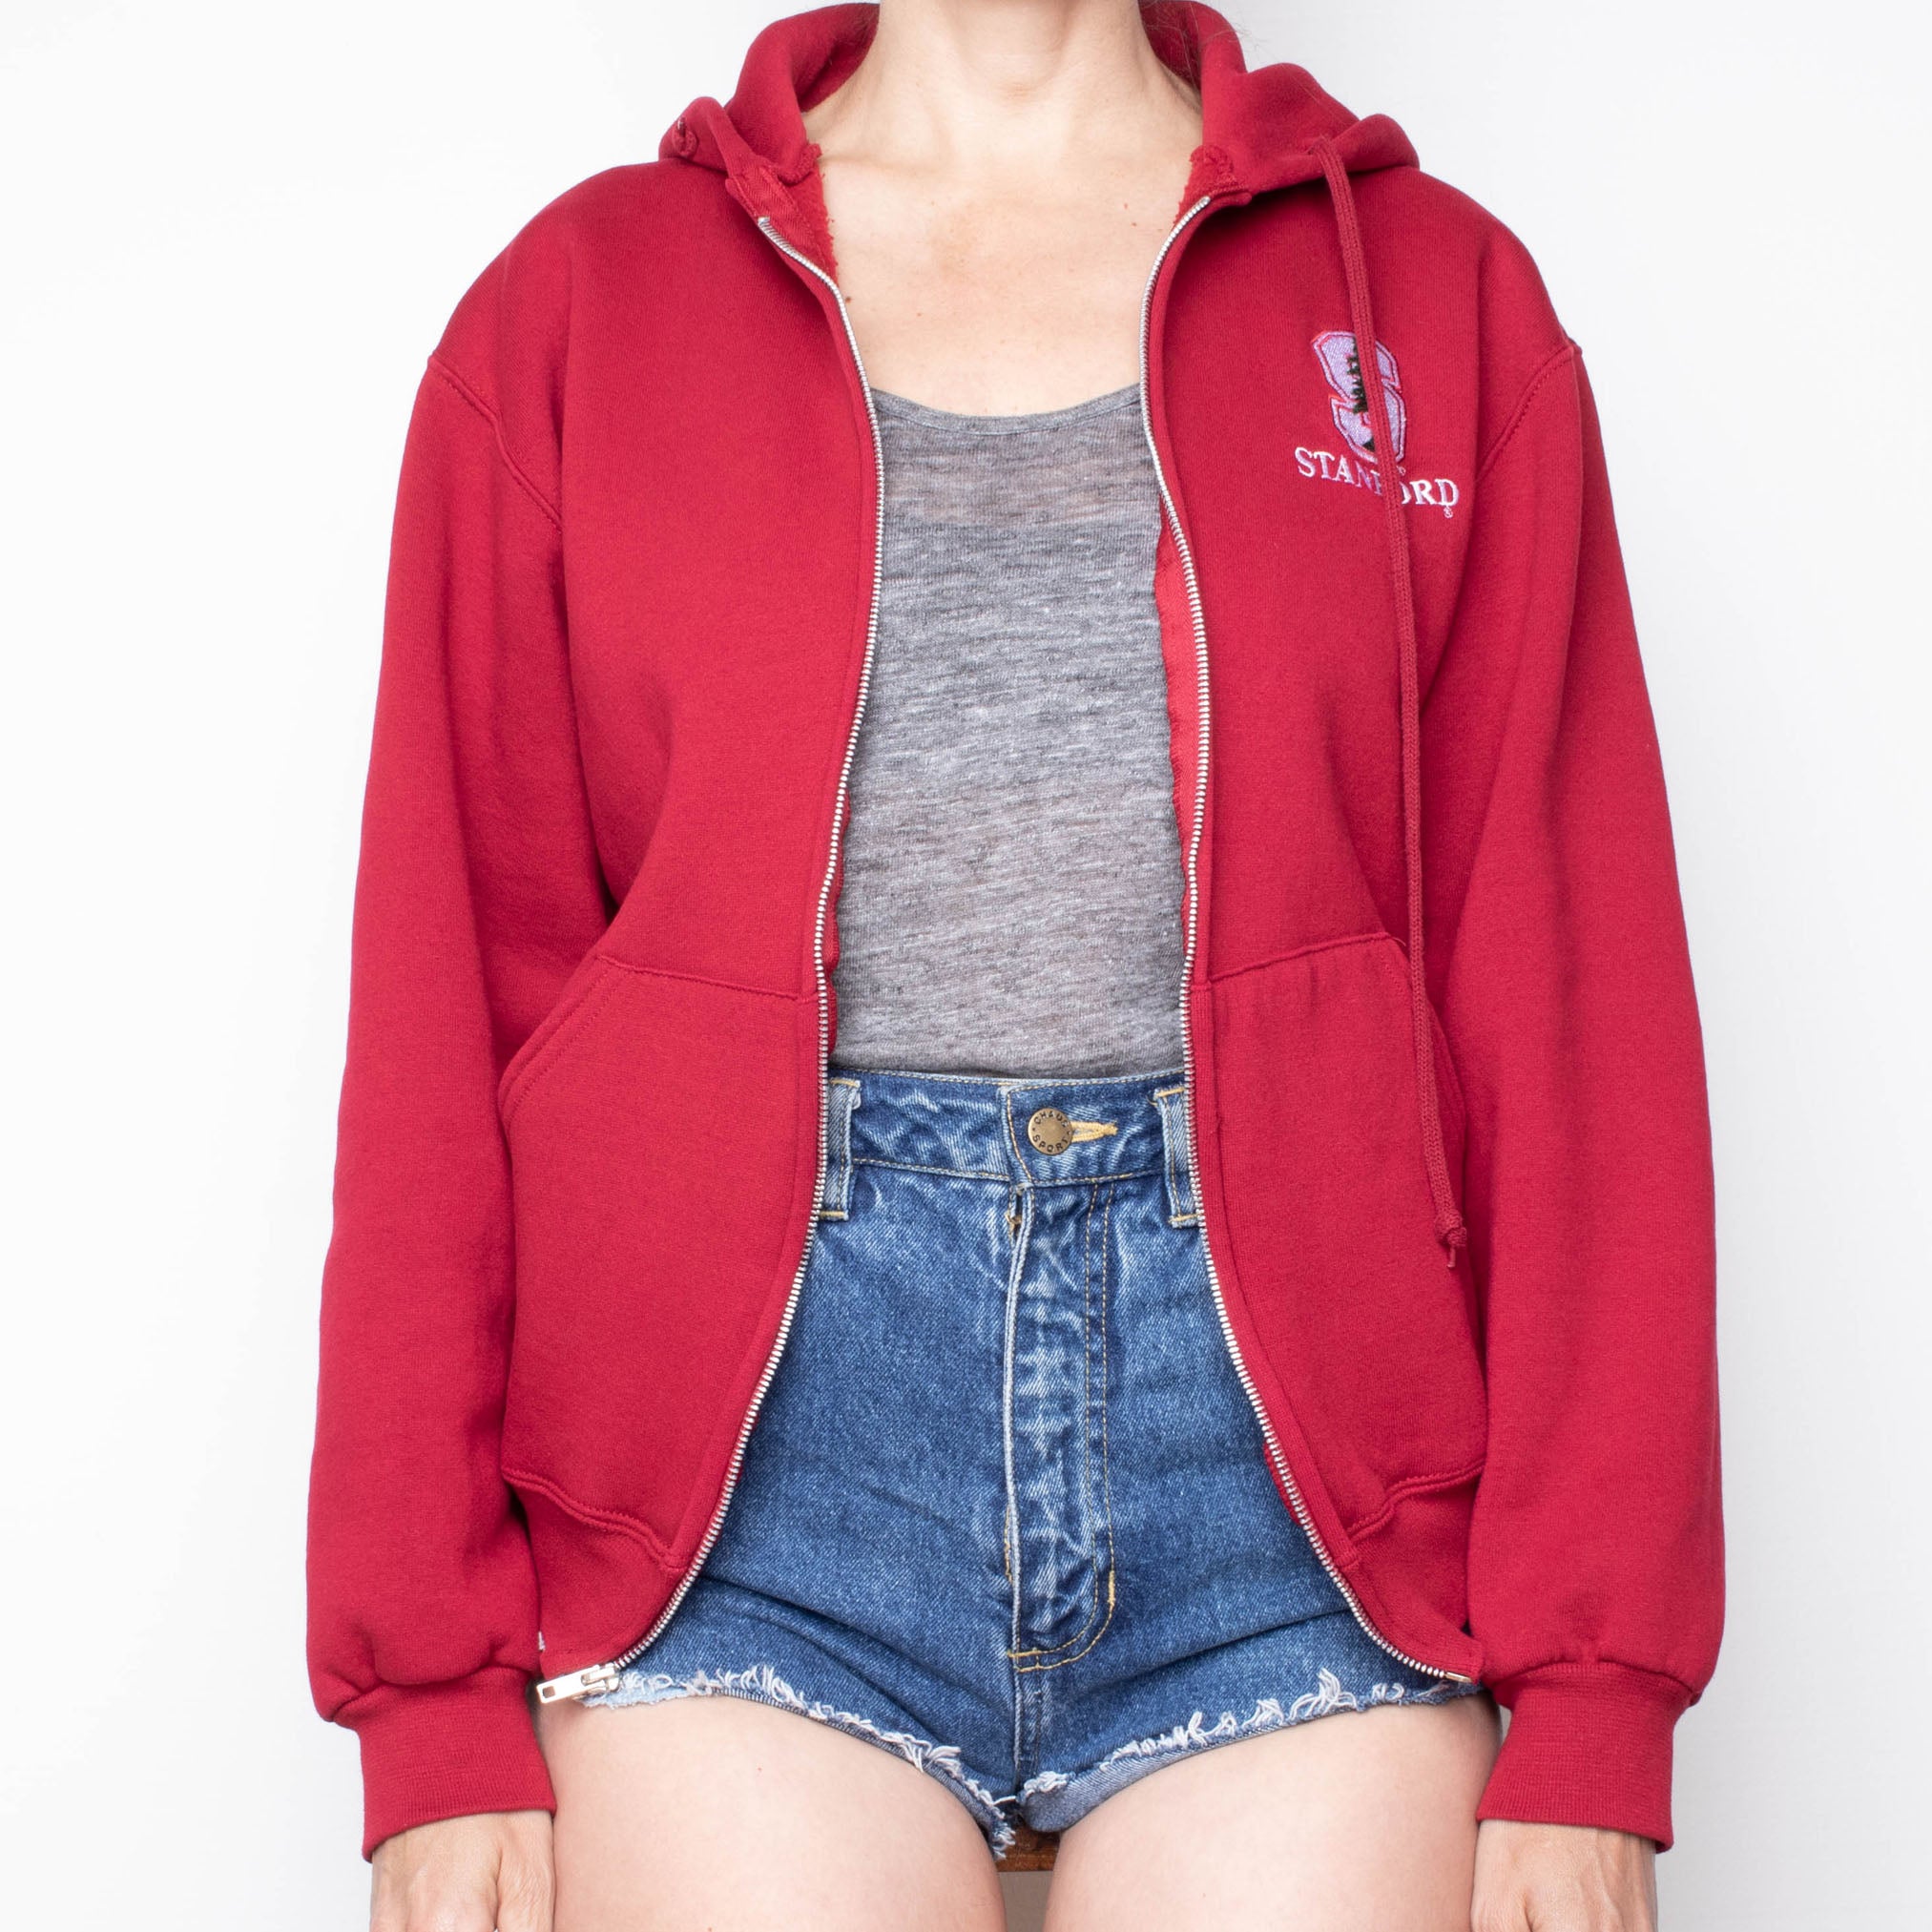  Stanford California CA Vintage Sports Design Red Design  Pullover Hoodie : Sports & Outdoors